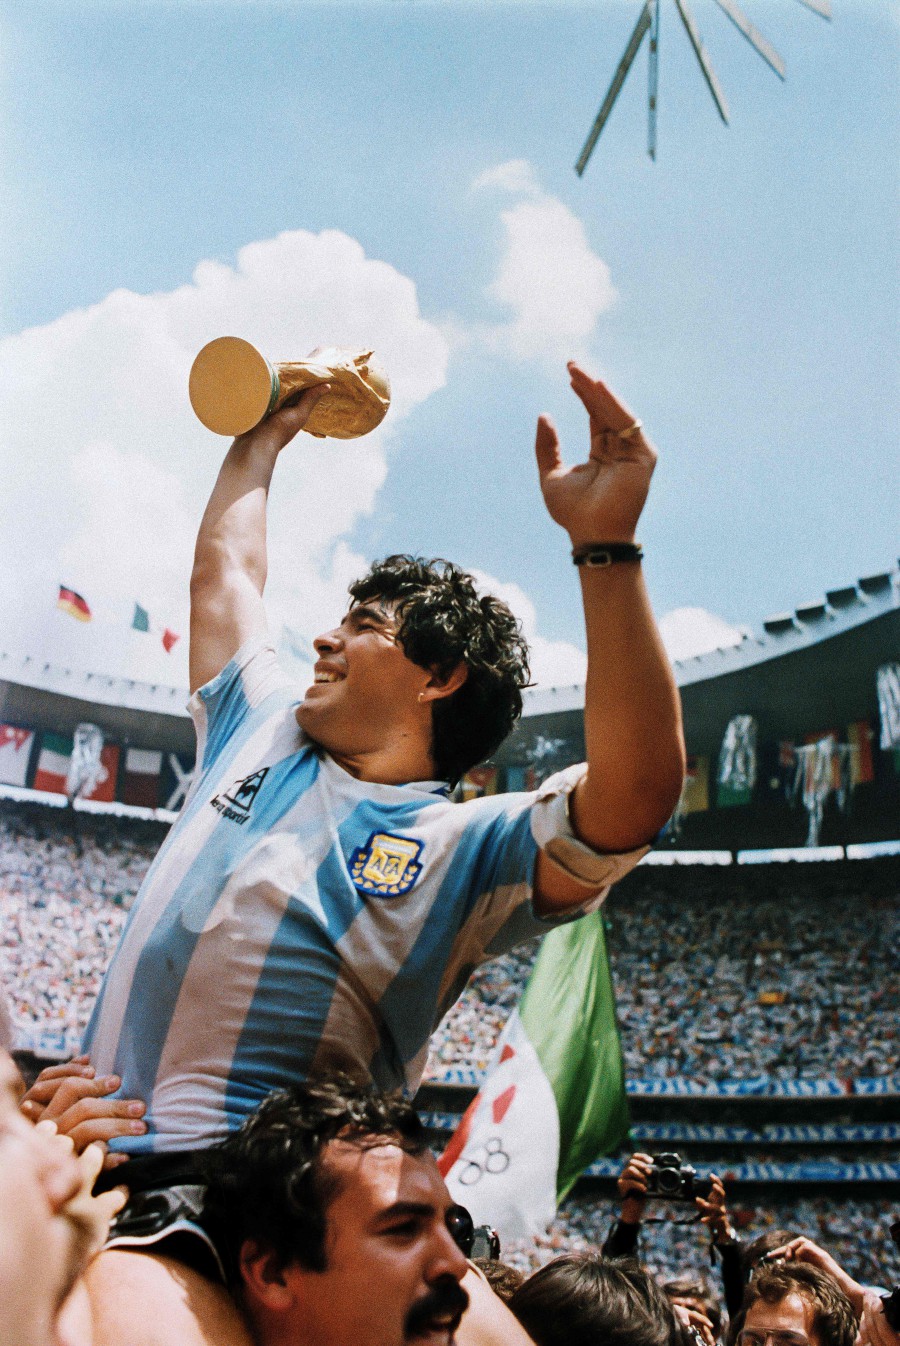  Argentina's football star team captain Diego Maradona brandishes the World Soccer Cup won by his team after a 3-2 victory over West Germany at the Azteca stadium in Mexico City. - AFP PIC